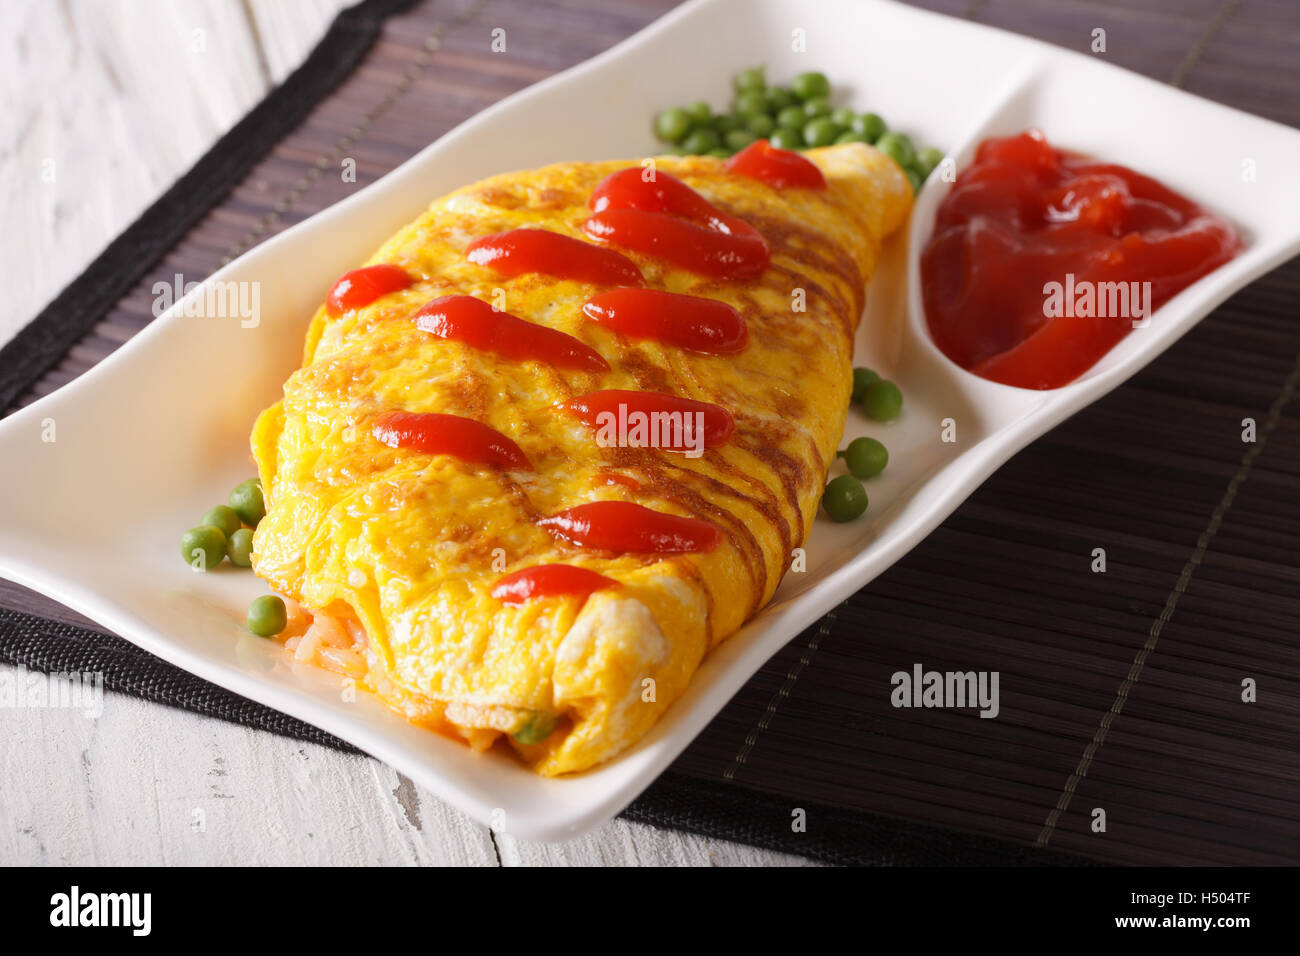 Delicious Omurice omelette with ketchup close-up on a plate. Horizontal Stock Photo